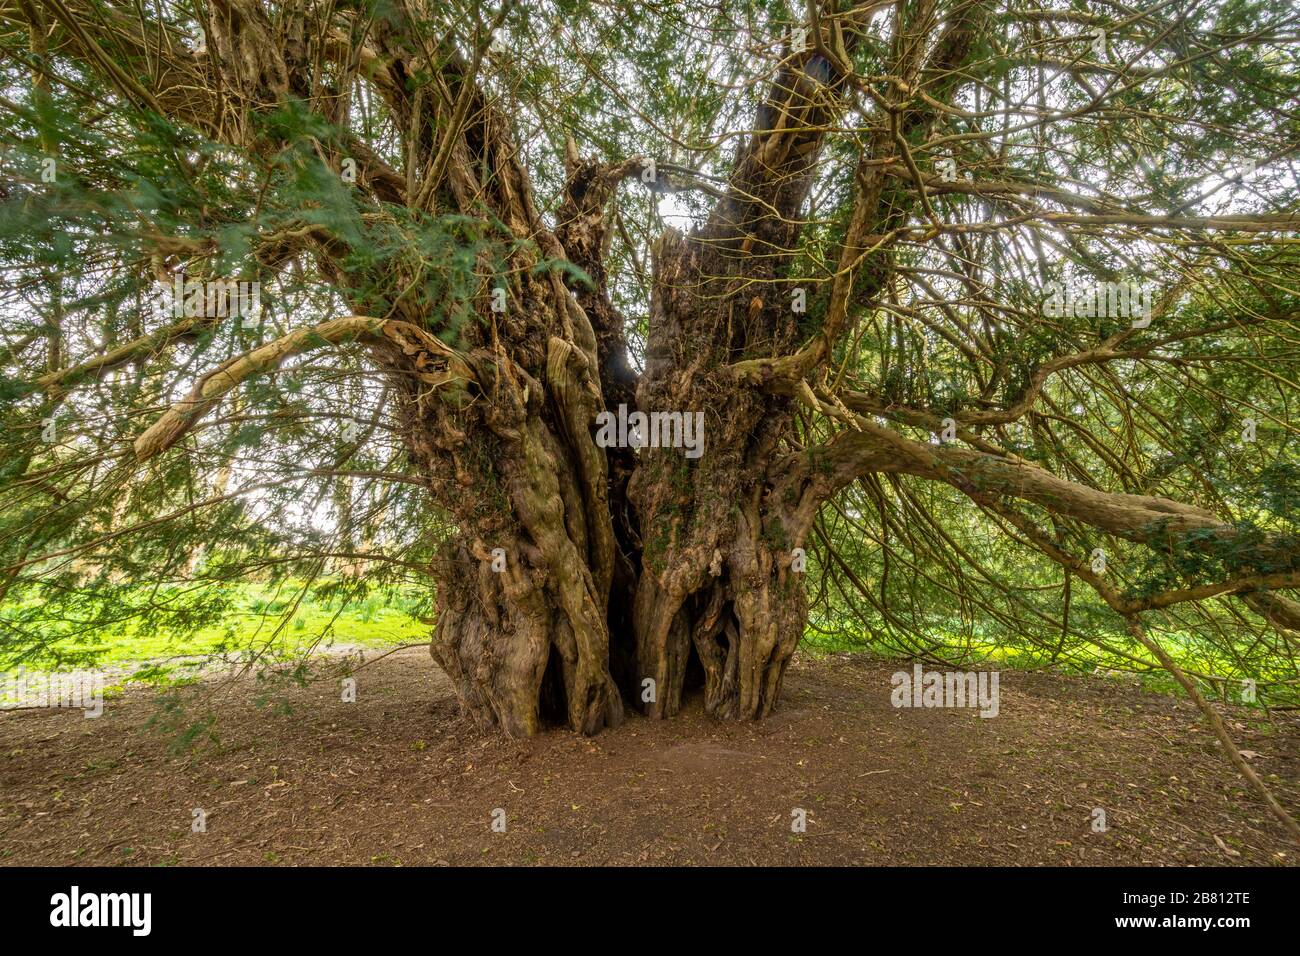 The famous Ankerwycke Yew, an ancient yew tree (Taxus baccata) probably aged over 2000 years old, at Runneymede, UK Stock Photo